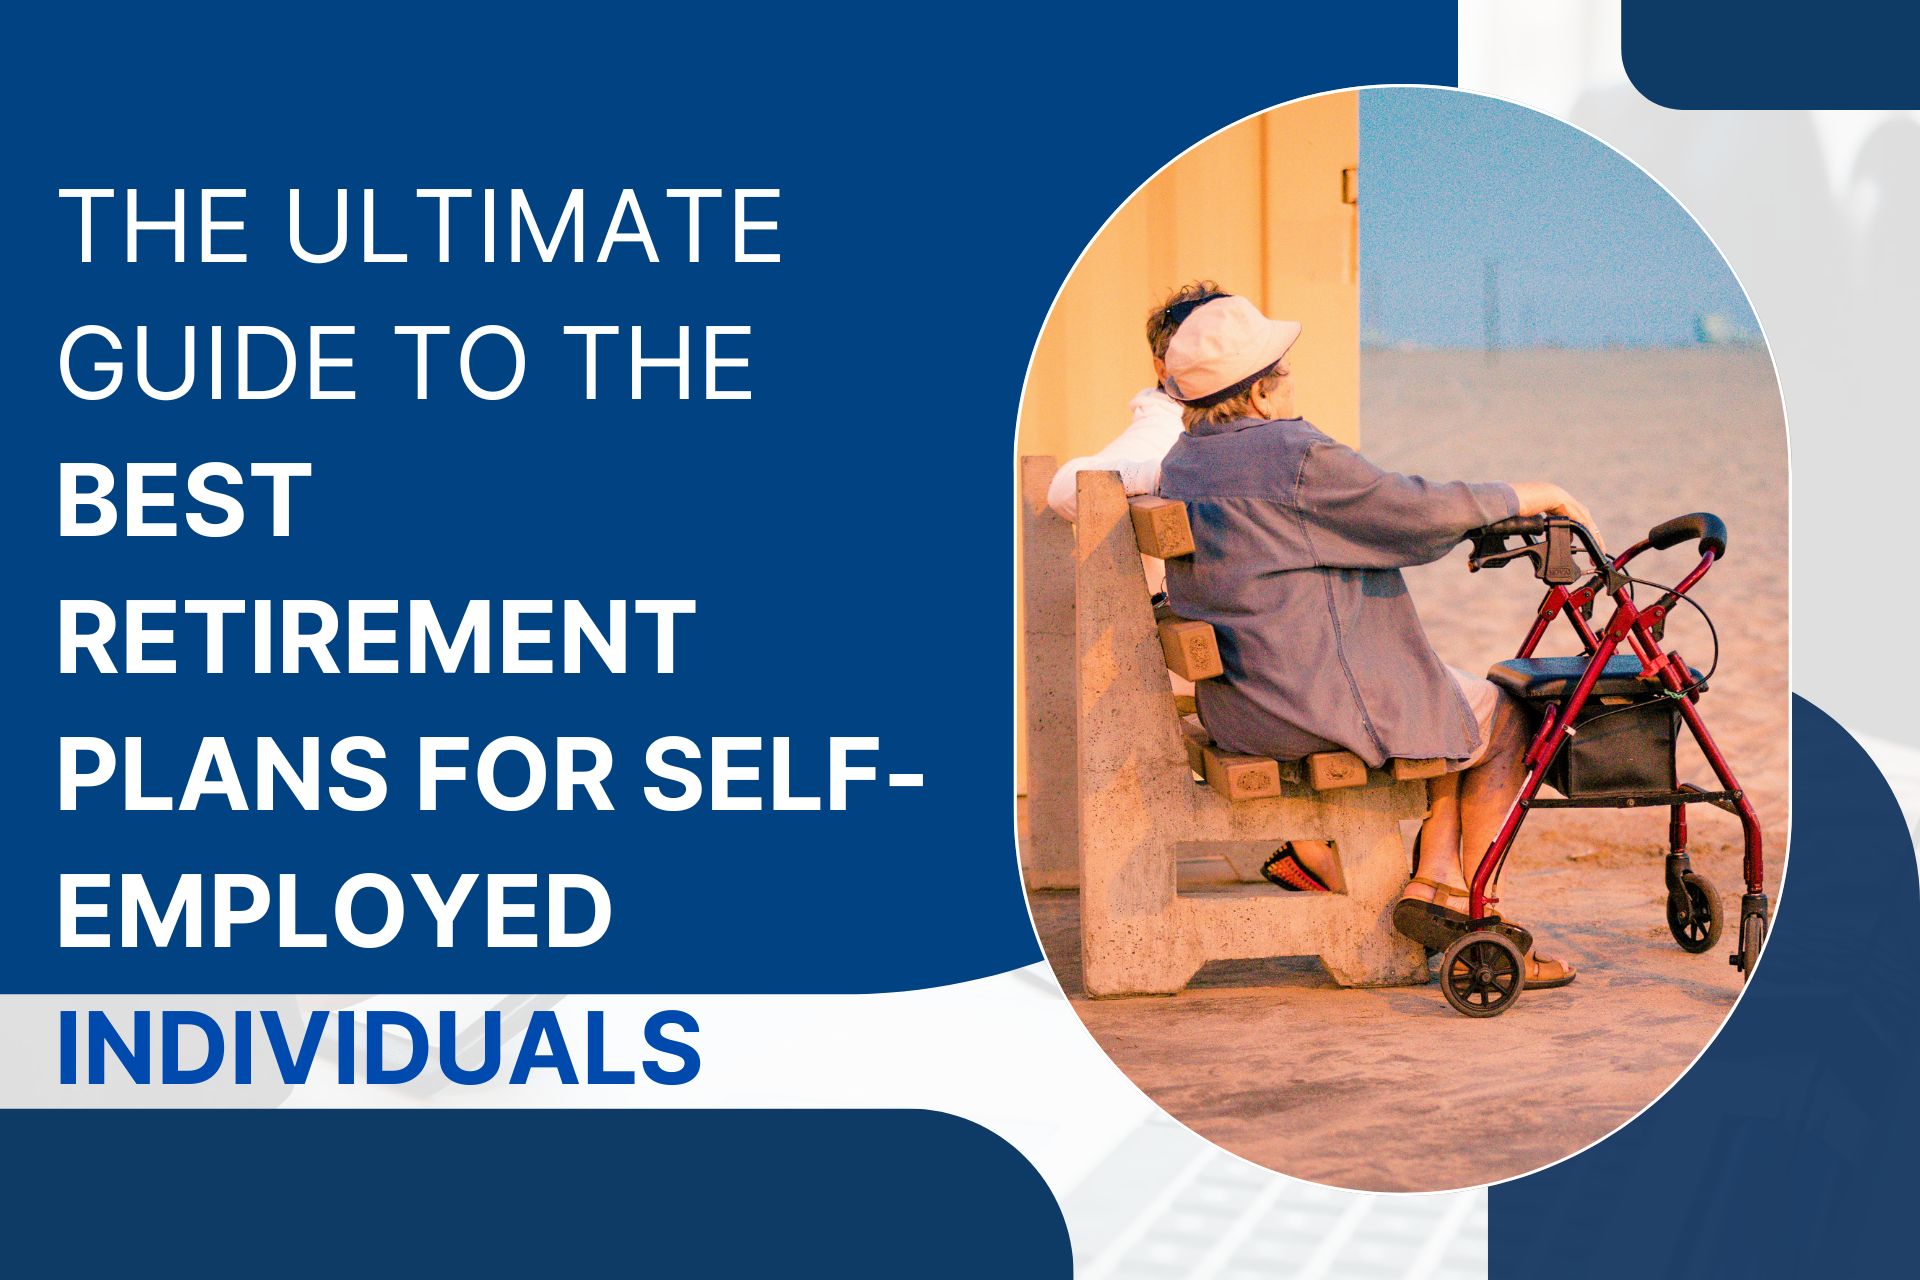 Best Retirement Plans for Self-Employed